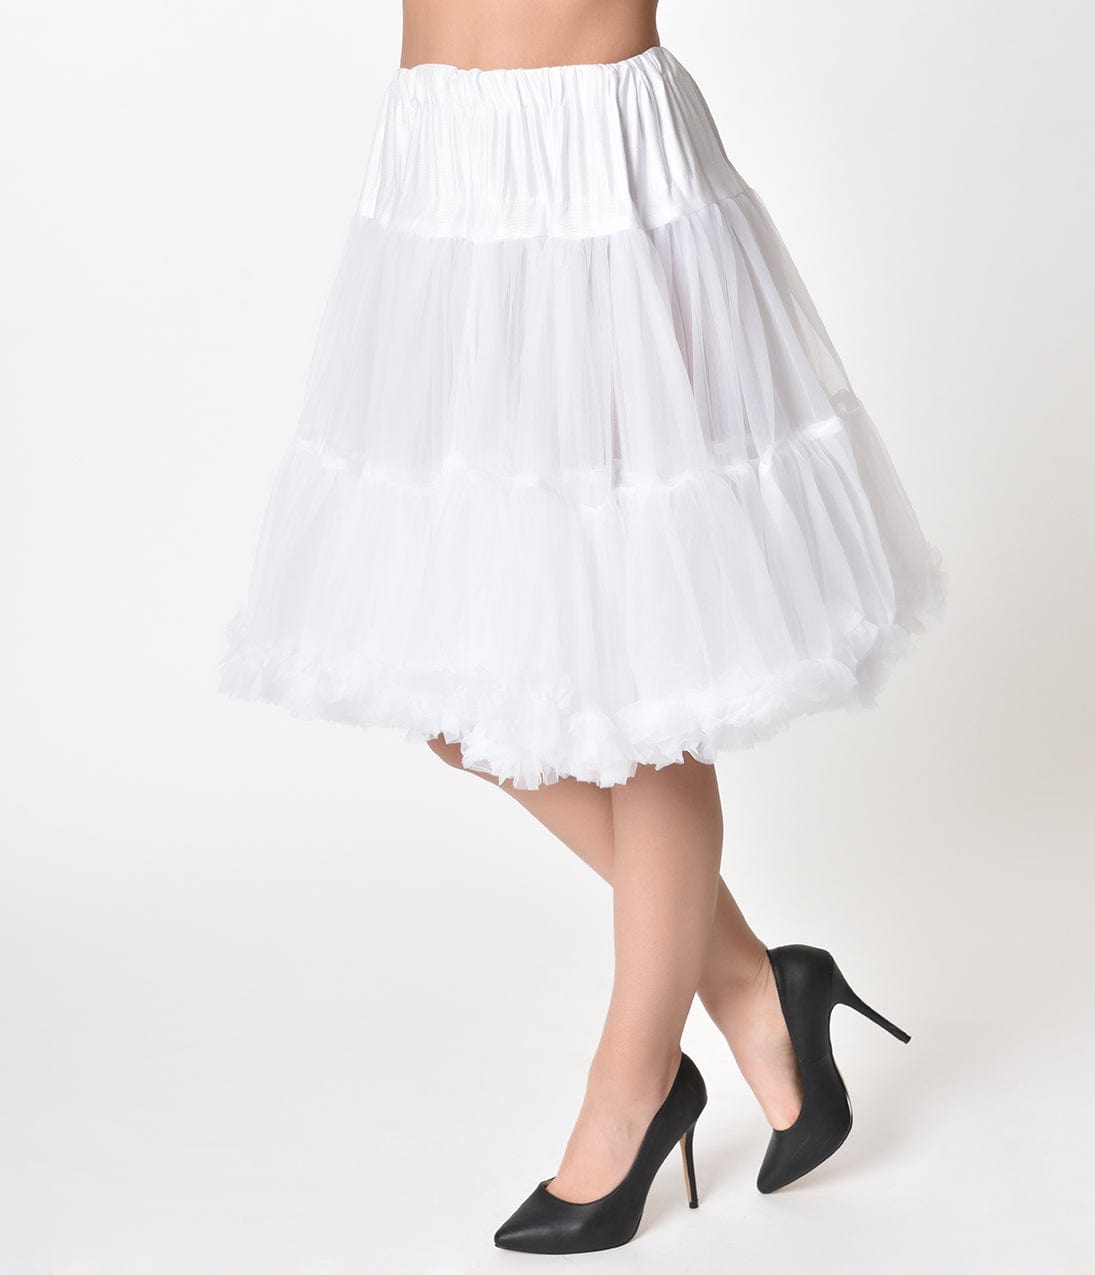 White Petticoat Under Dress and Red High Heels  Rockabilly dress, Circle  dress, Frilly dresses